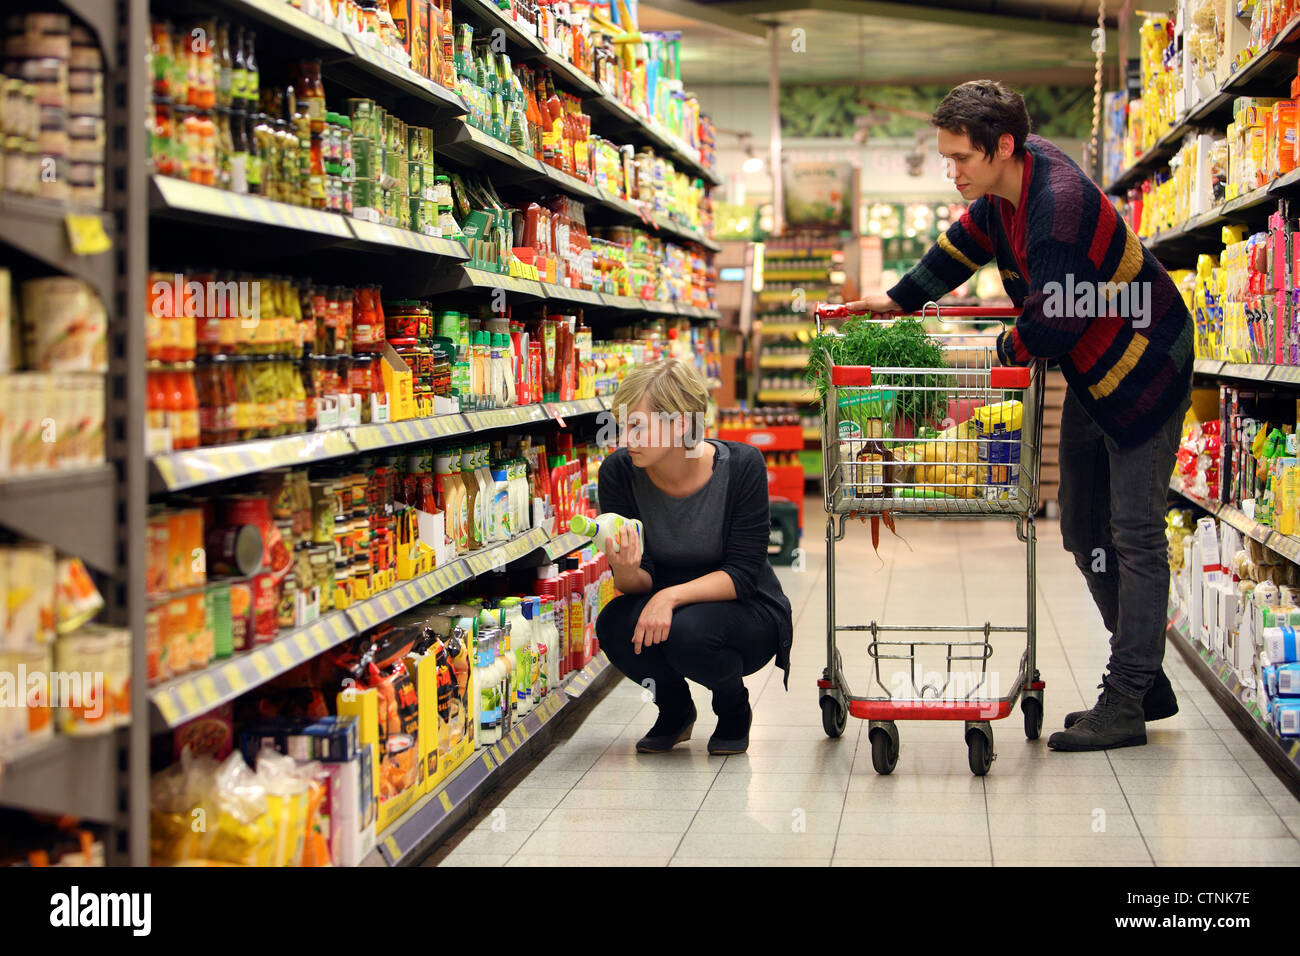 A young couple in a large supermarket, shopping with a trolley, walking through the aisles with shelfs full of food products. Stock Photo